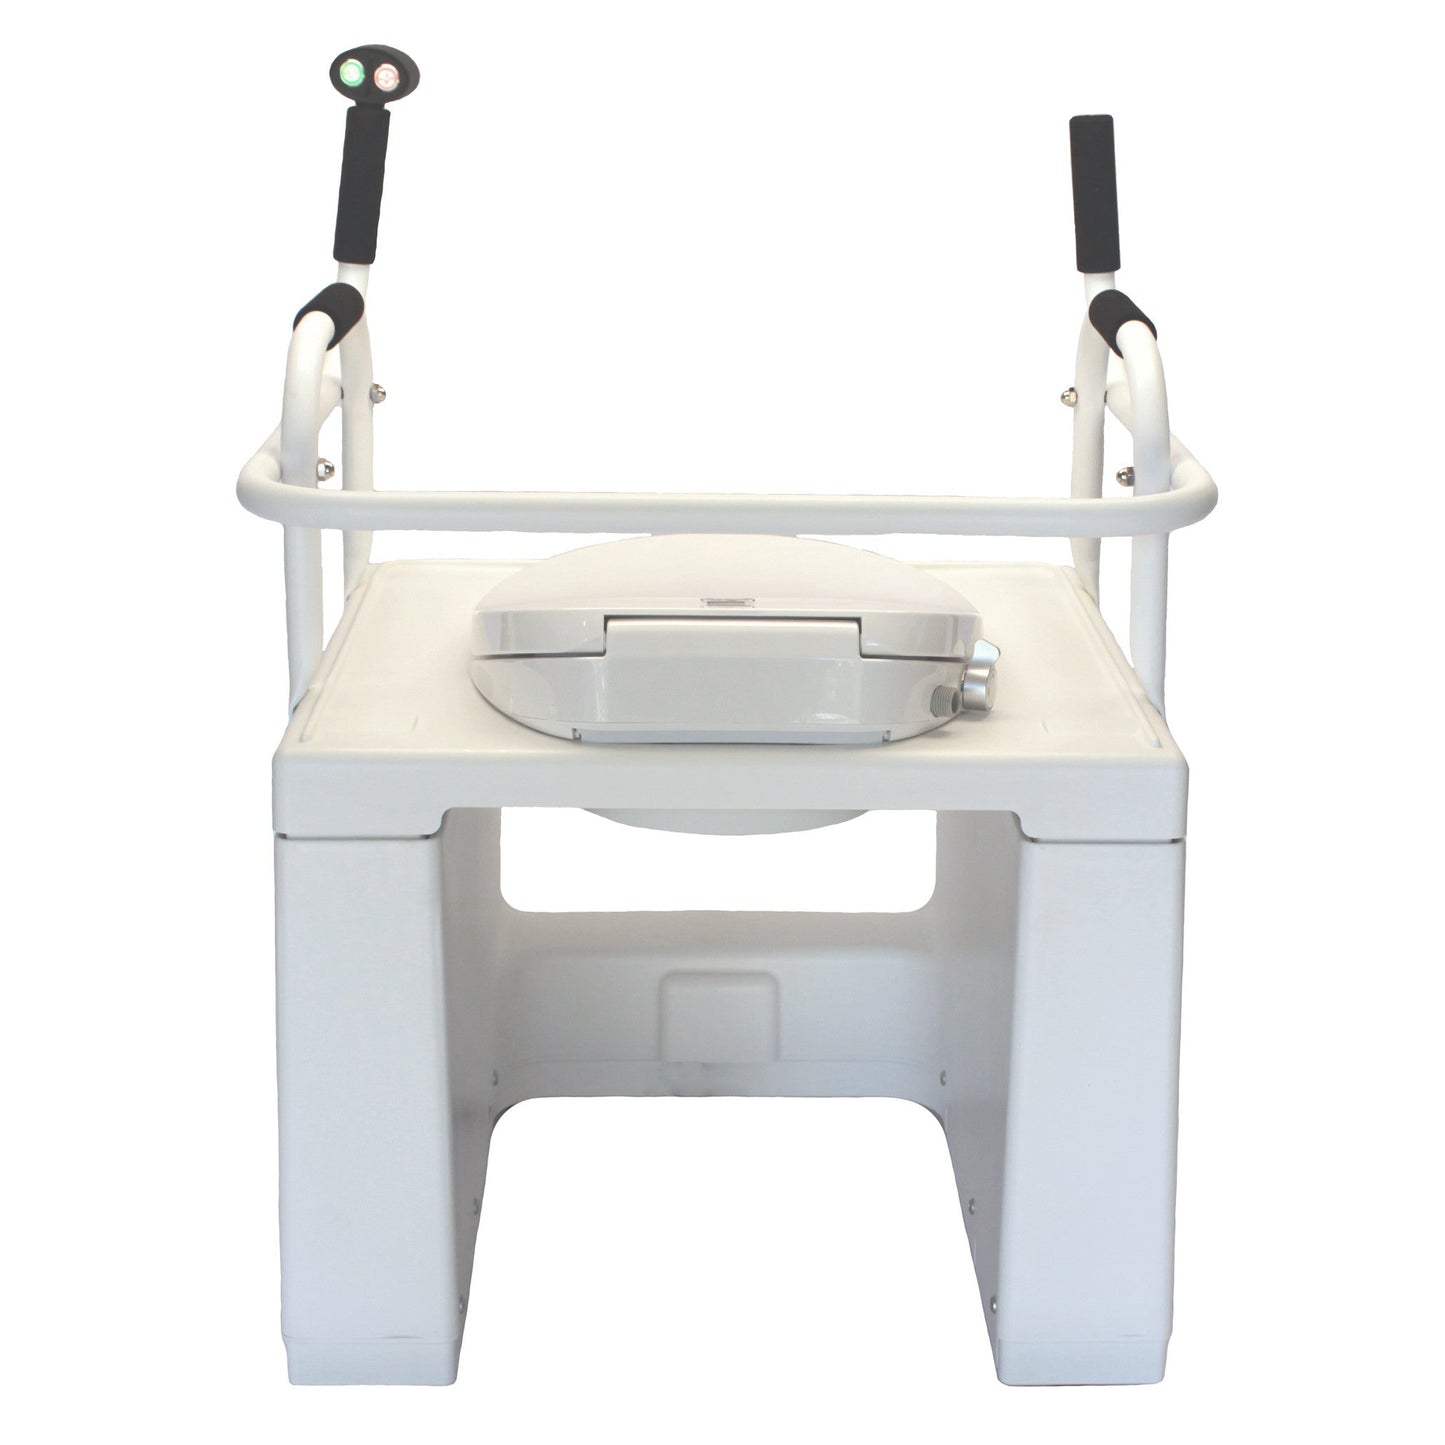 Throne Buttler 37" Powered Toilet Lift Chair With 28" Wide Handle Bar and Upgraded Soft Close Toilet Seat